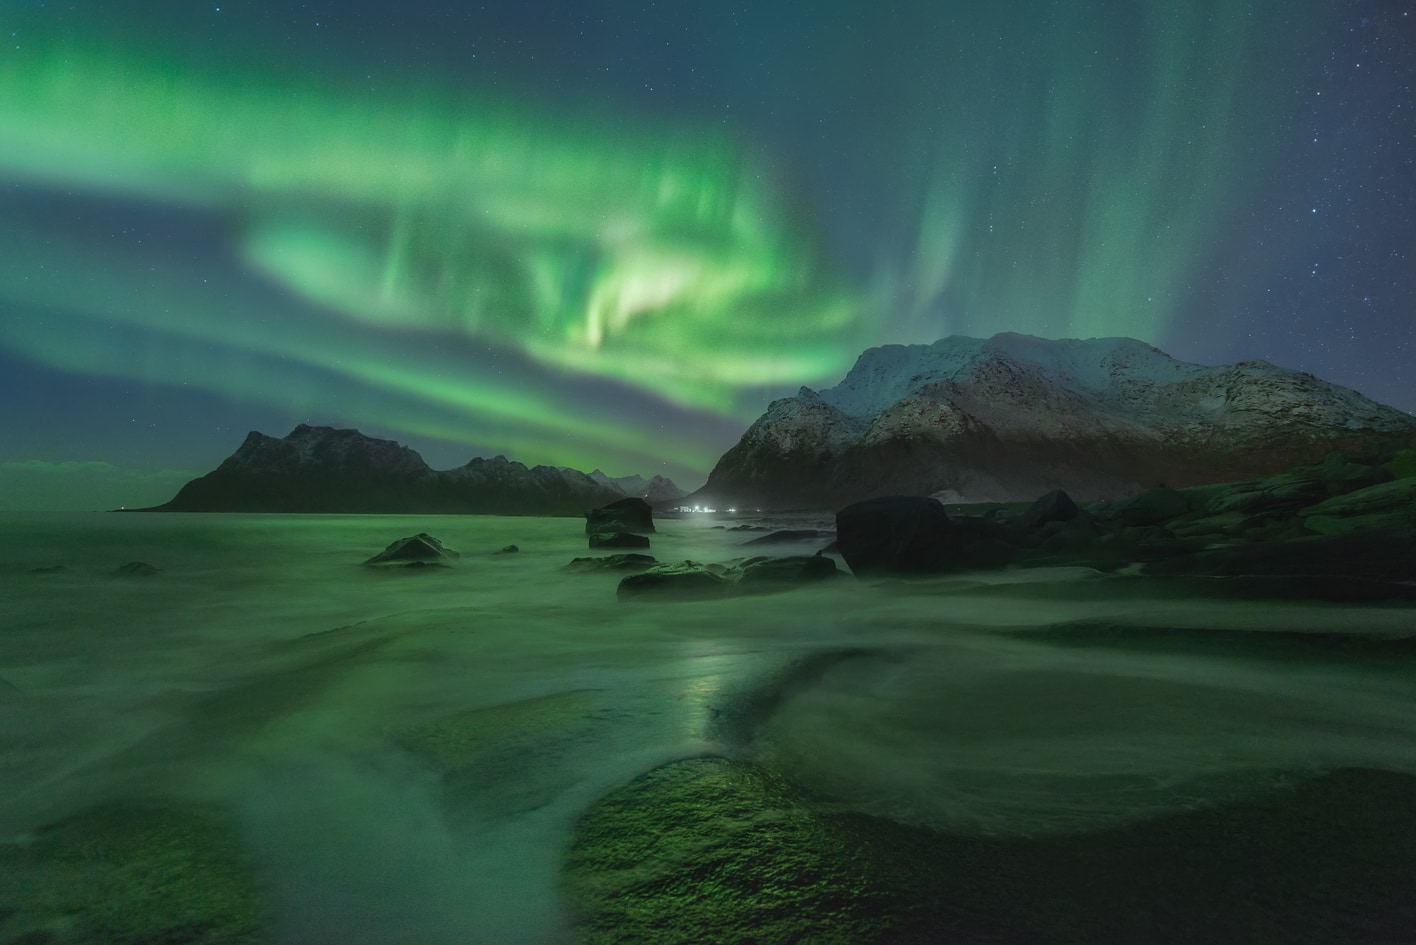 when to see the northern lights in Norway